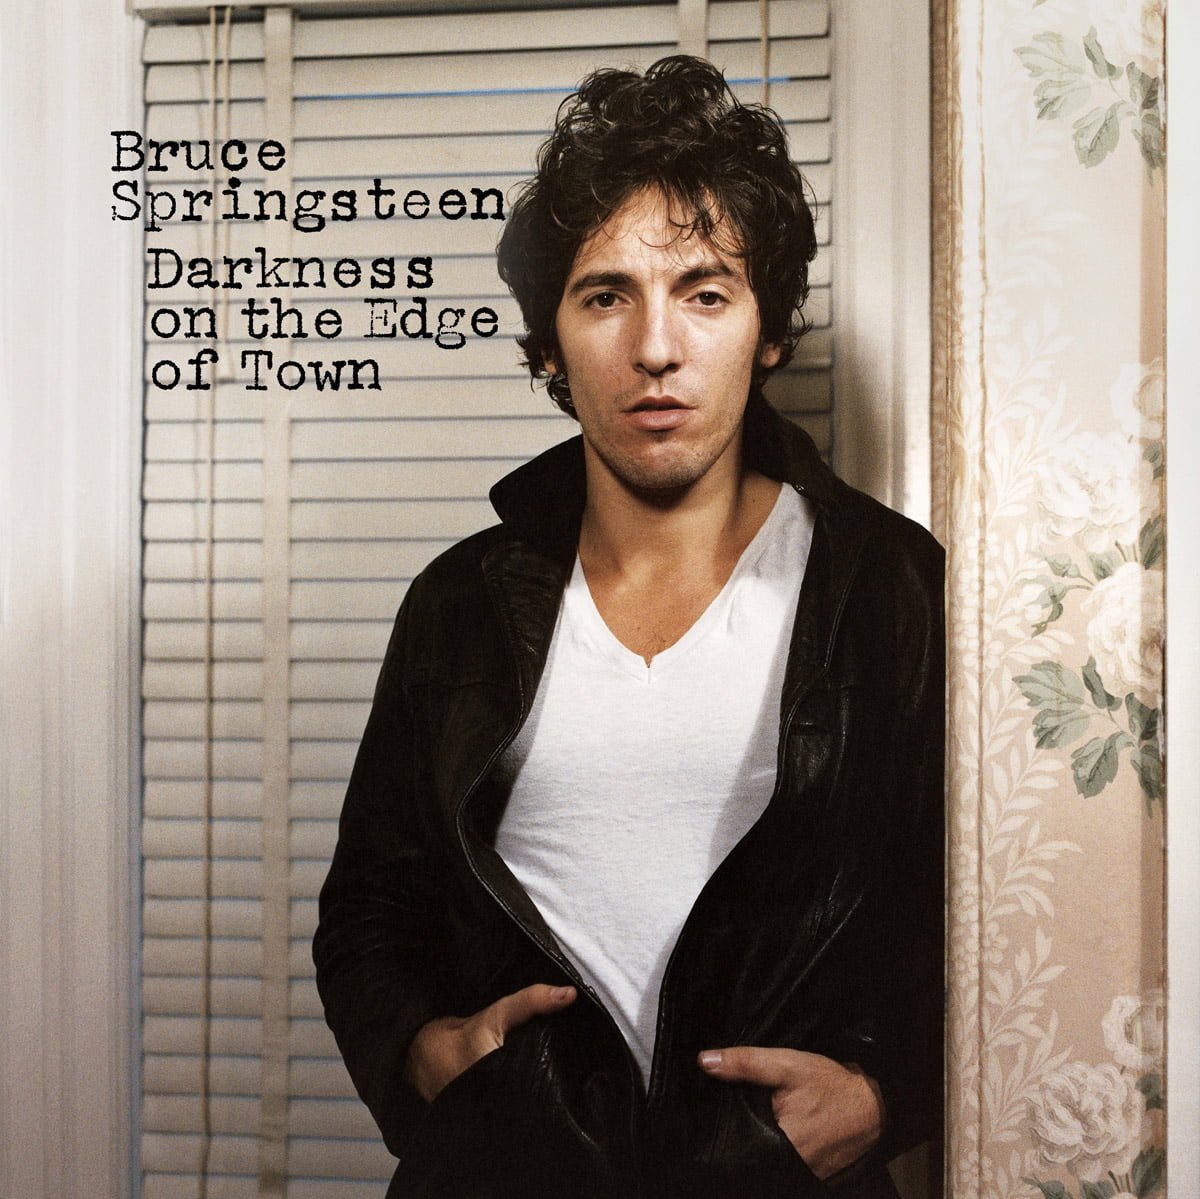 Bruce Springsteen Darkness on the Edge of Town front cover